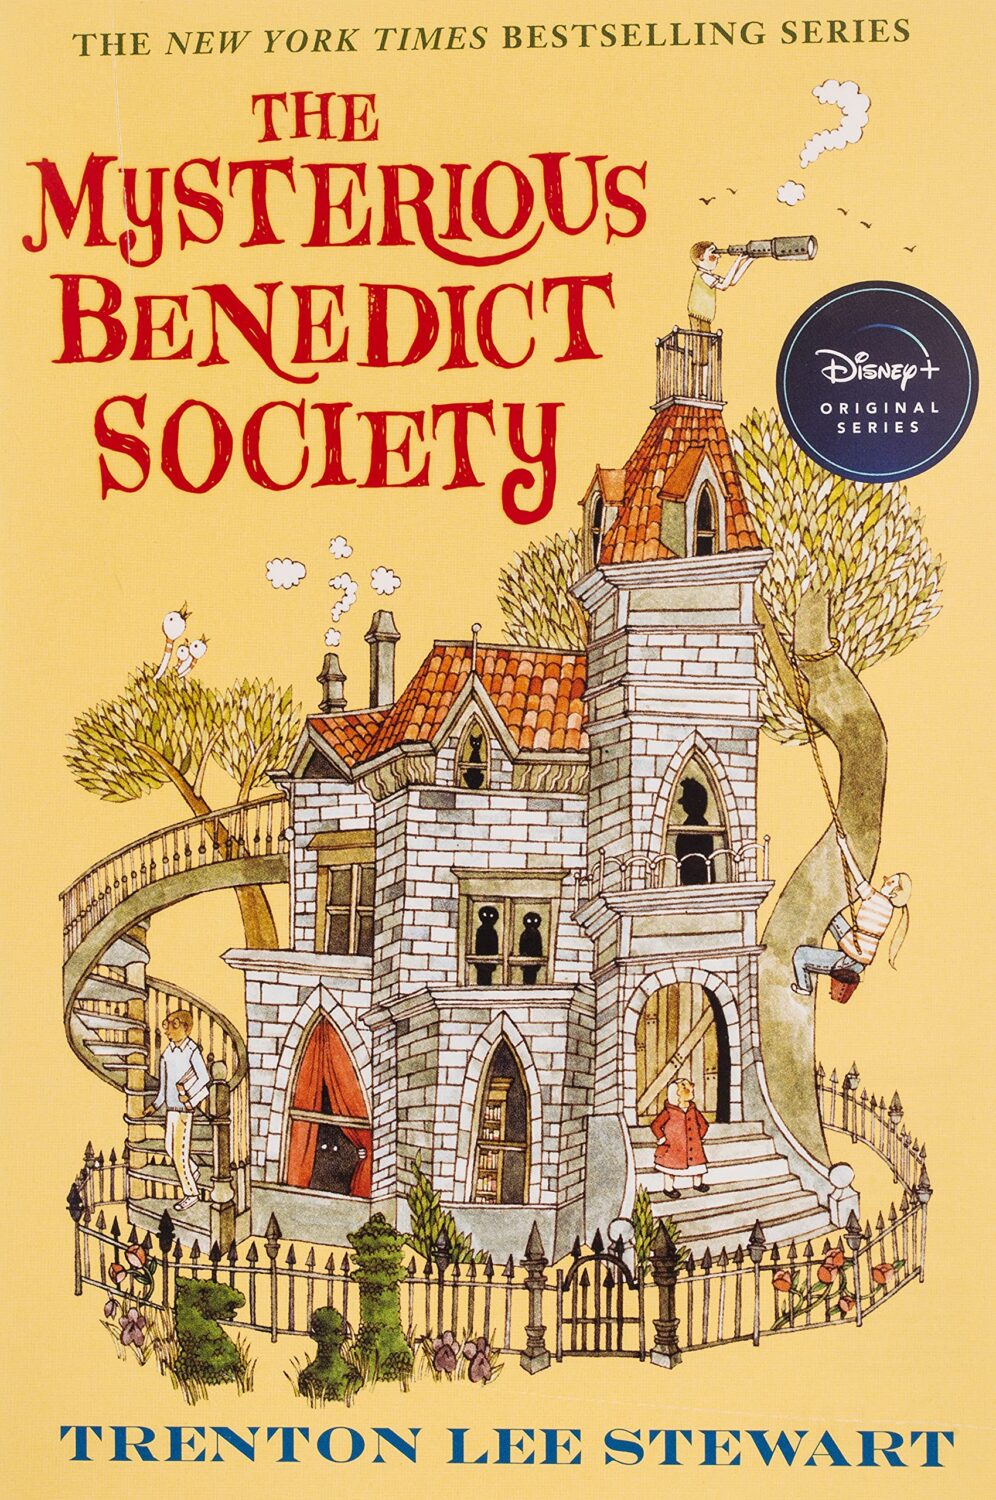 The Mysterious Benedict Society and more books like Keeper of the lost cities